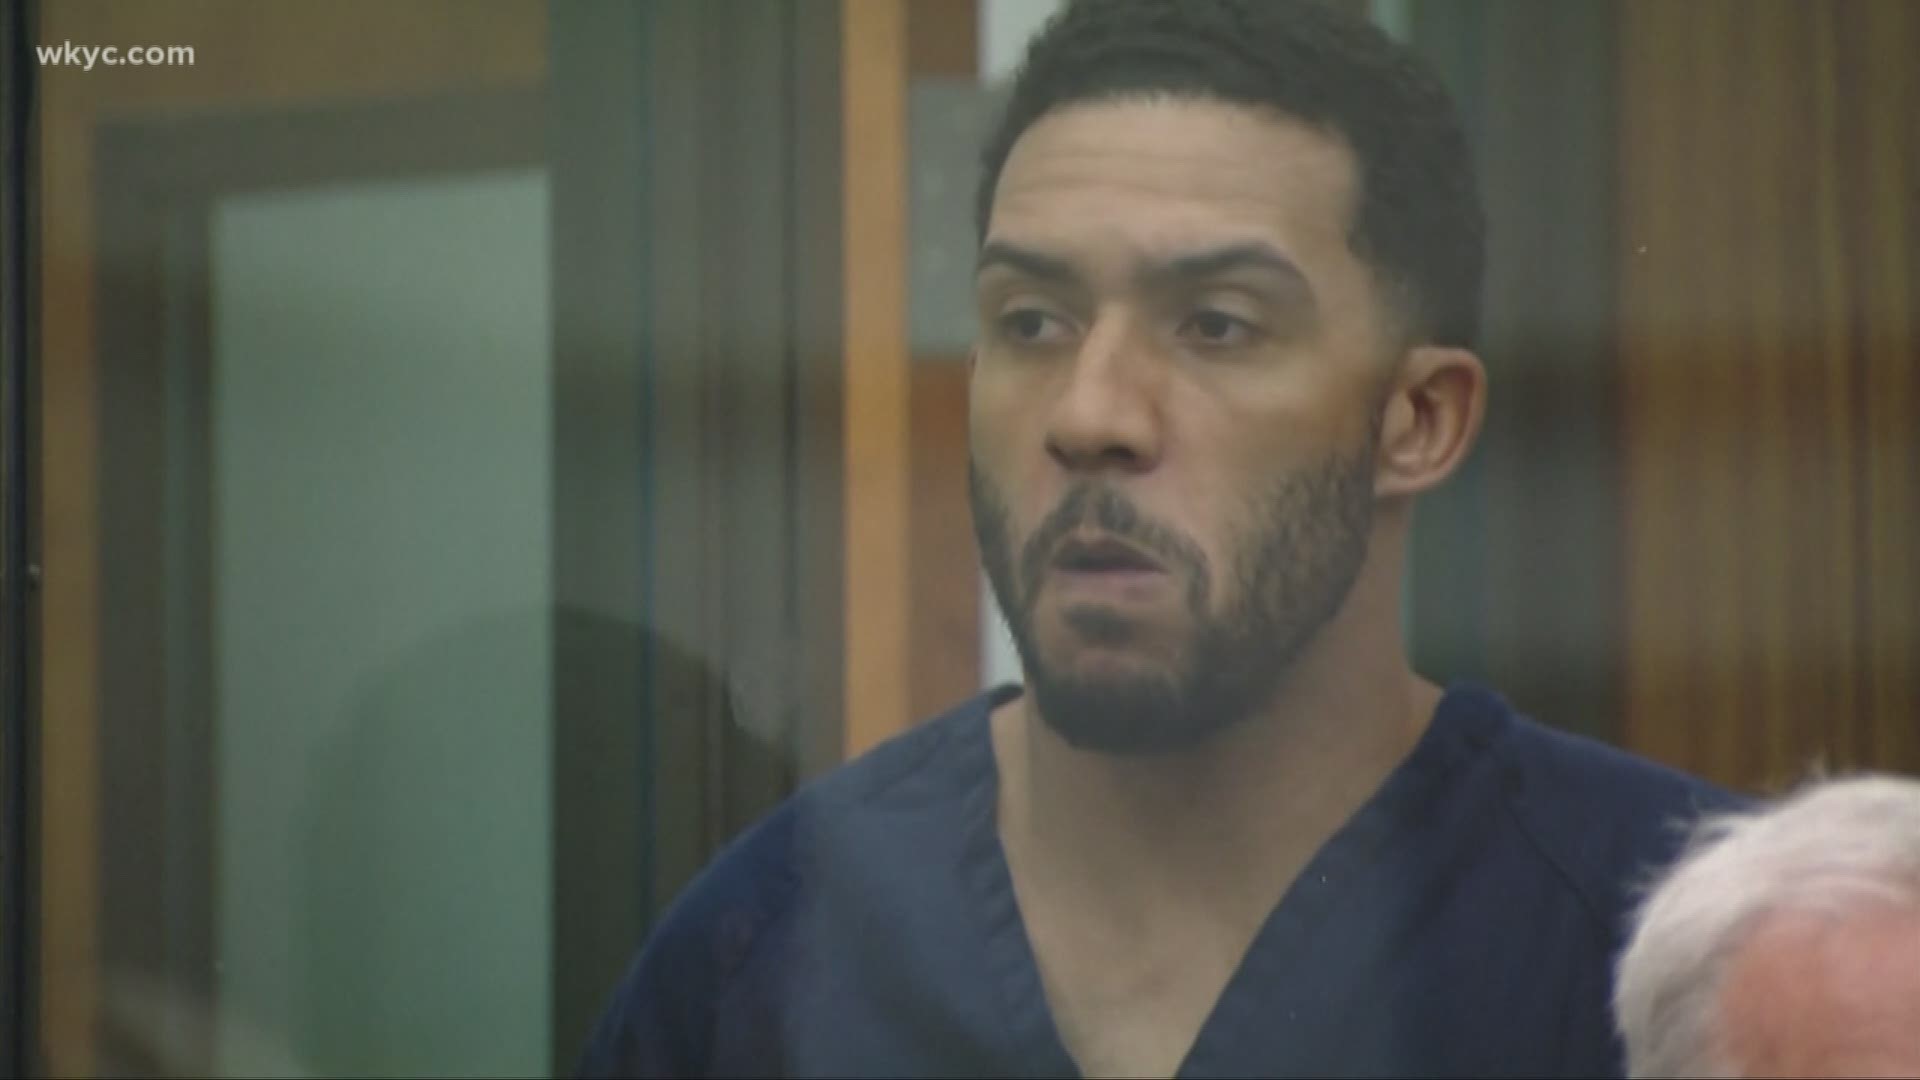 Former NFL star Kellen Winslow Jr. has been convicted of raping a 58-year-old homeless woman last year in San Diego County.  He faces a prison sentence of 15 years to life.